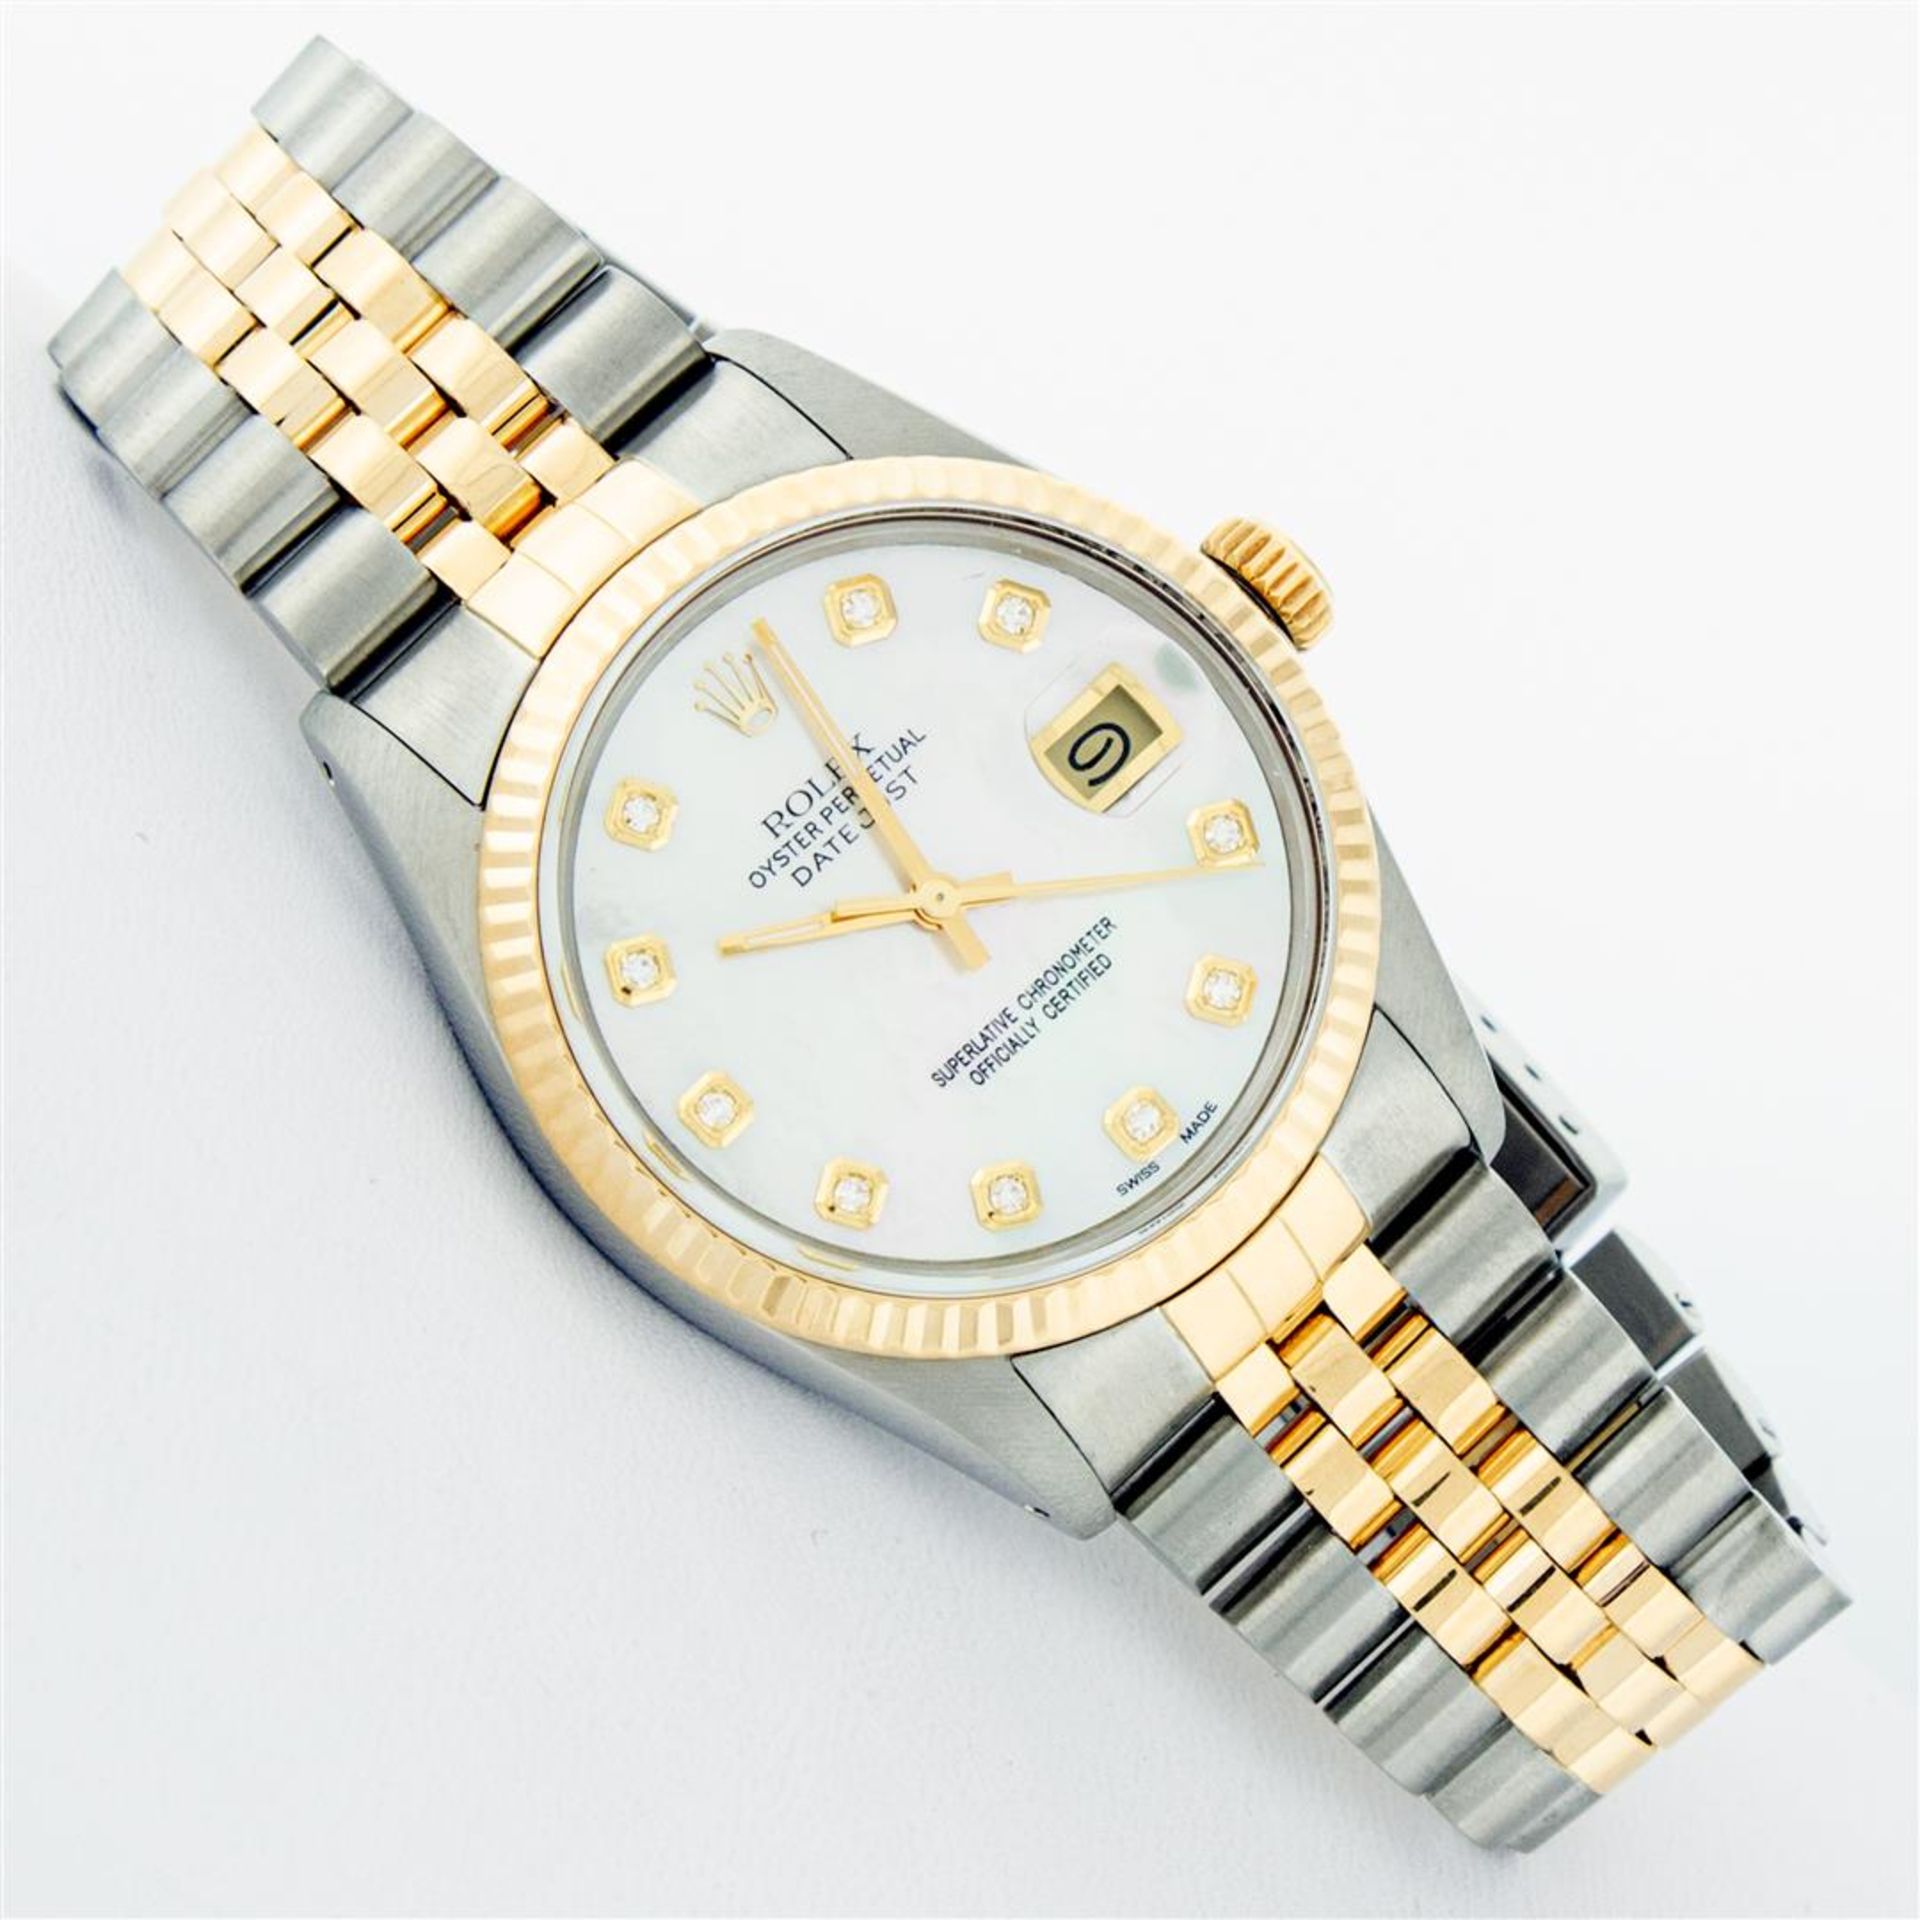 Rolex Mens 2 Tone Mother Of Pearl VS Diamond 36MM Datejust Wristwatch - Image 5 of 18